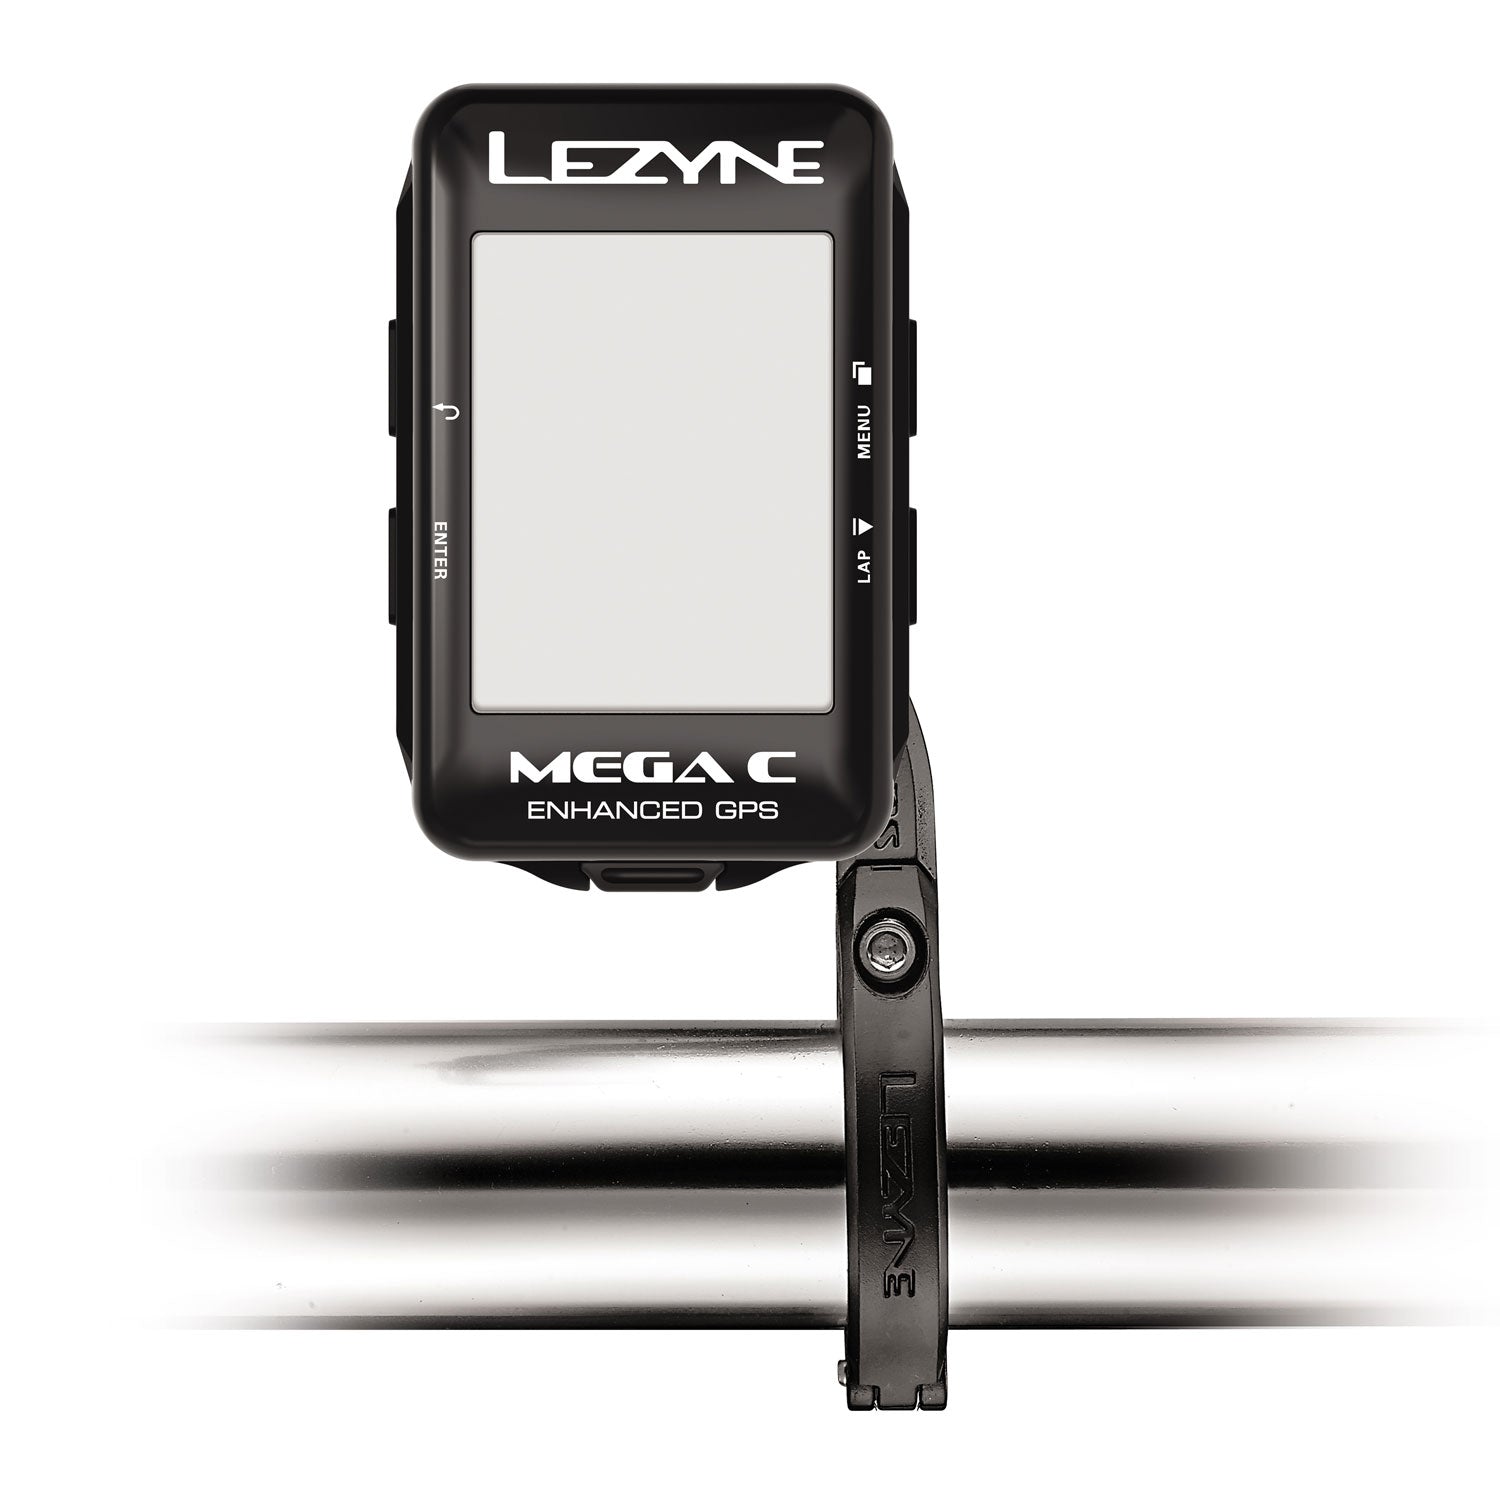 The Mega XL GPS: Here For The Long Haul